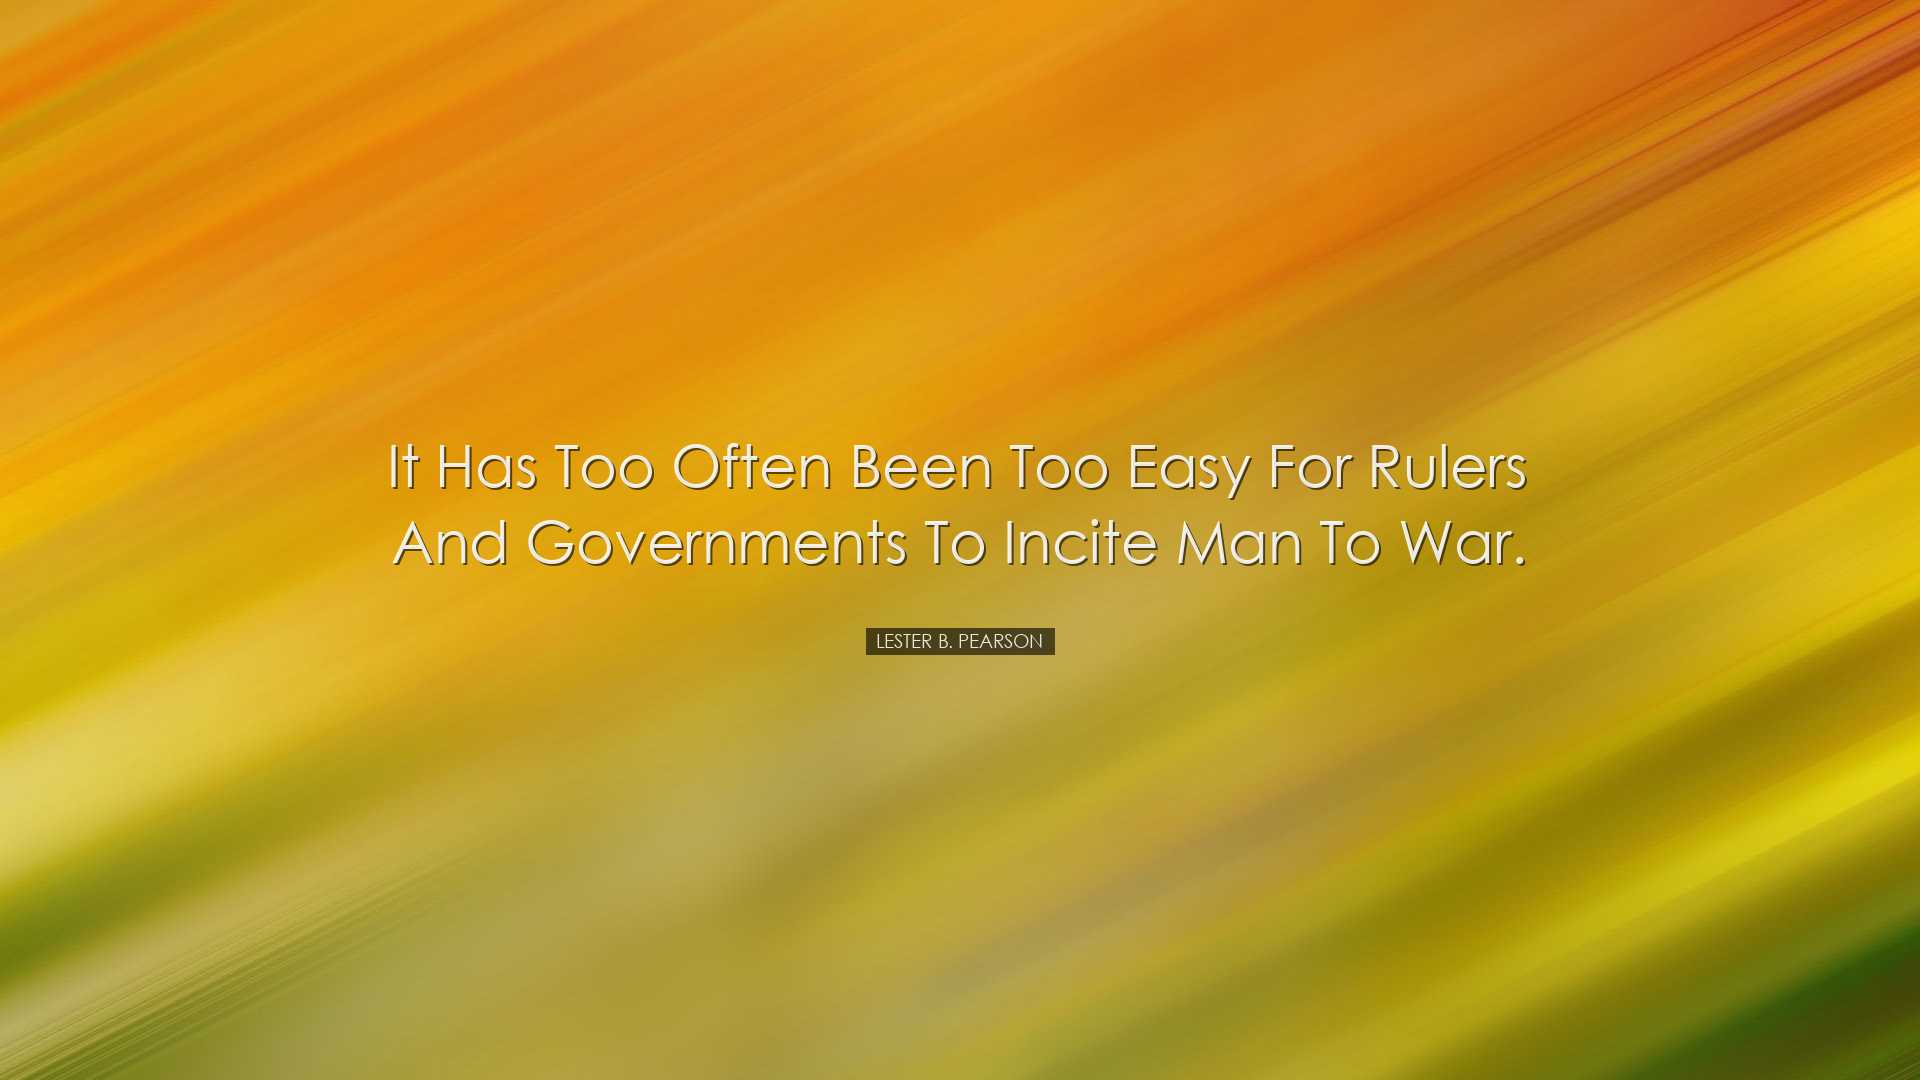 It has too often been too easy for rulers and governments to incit